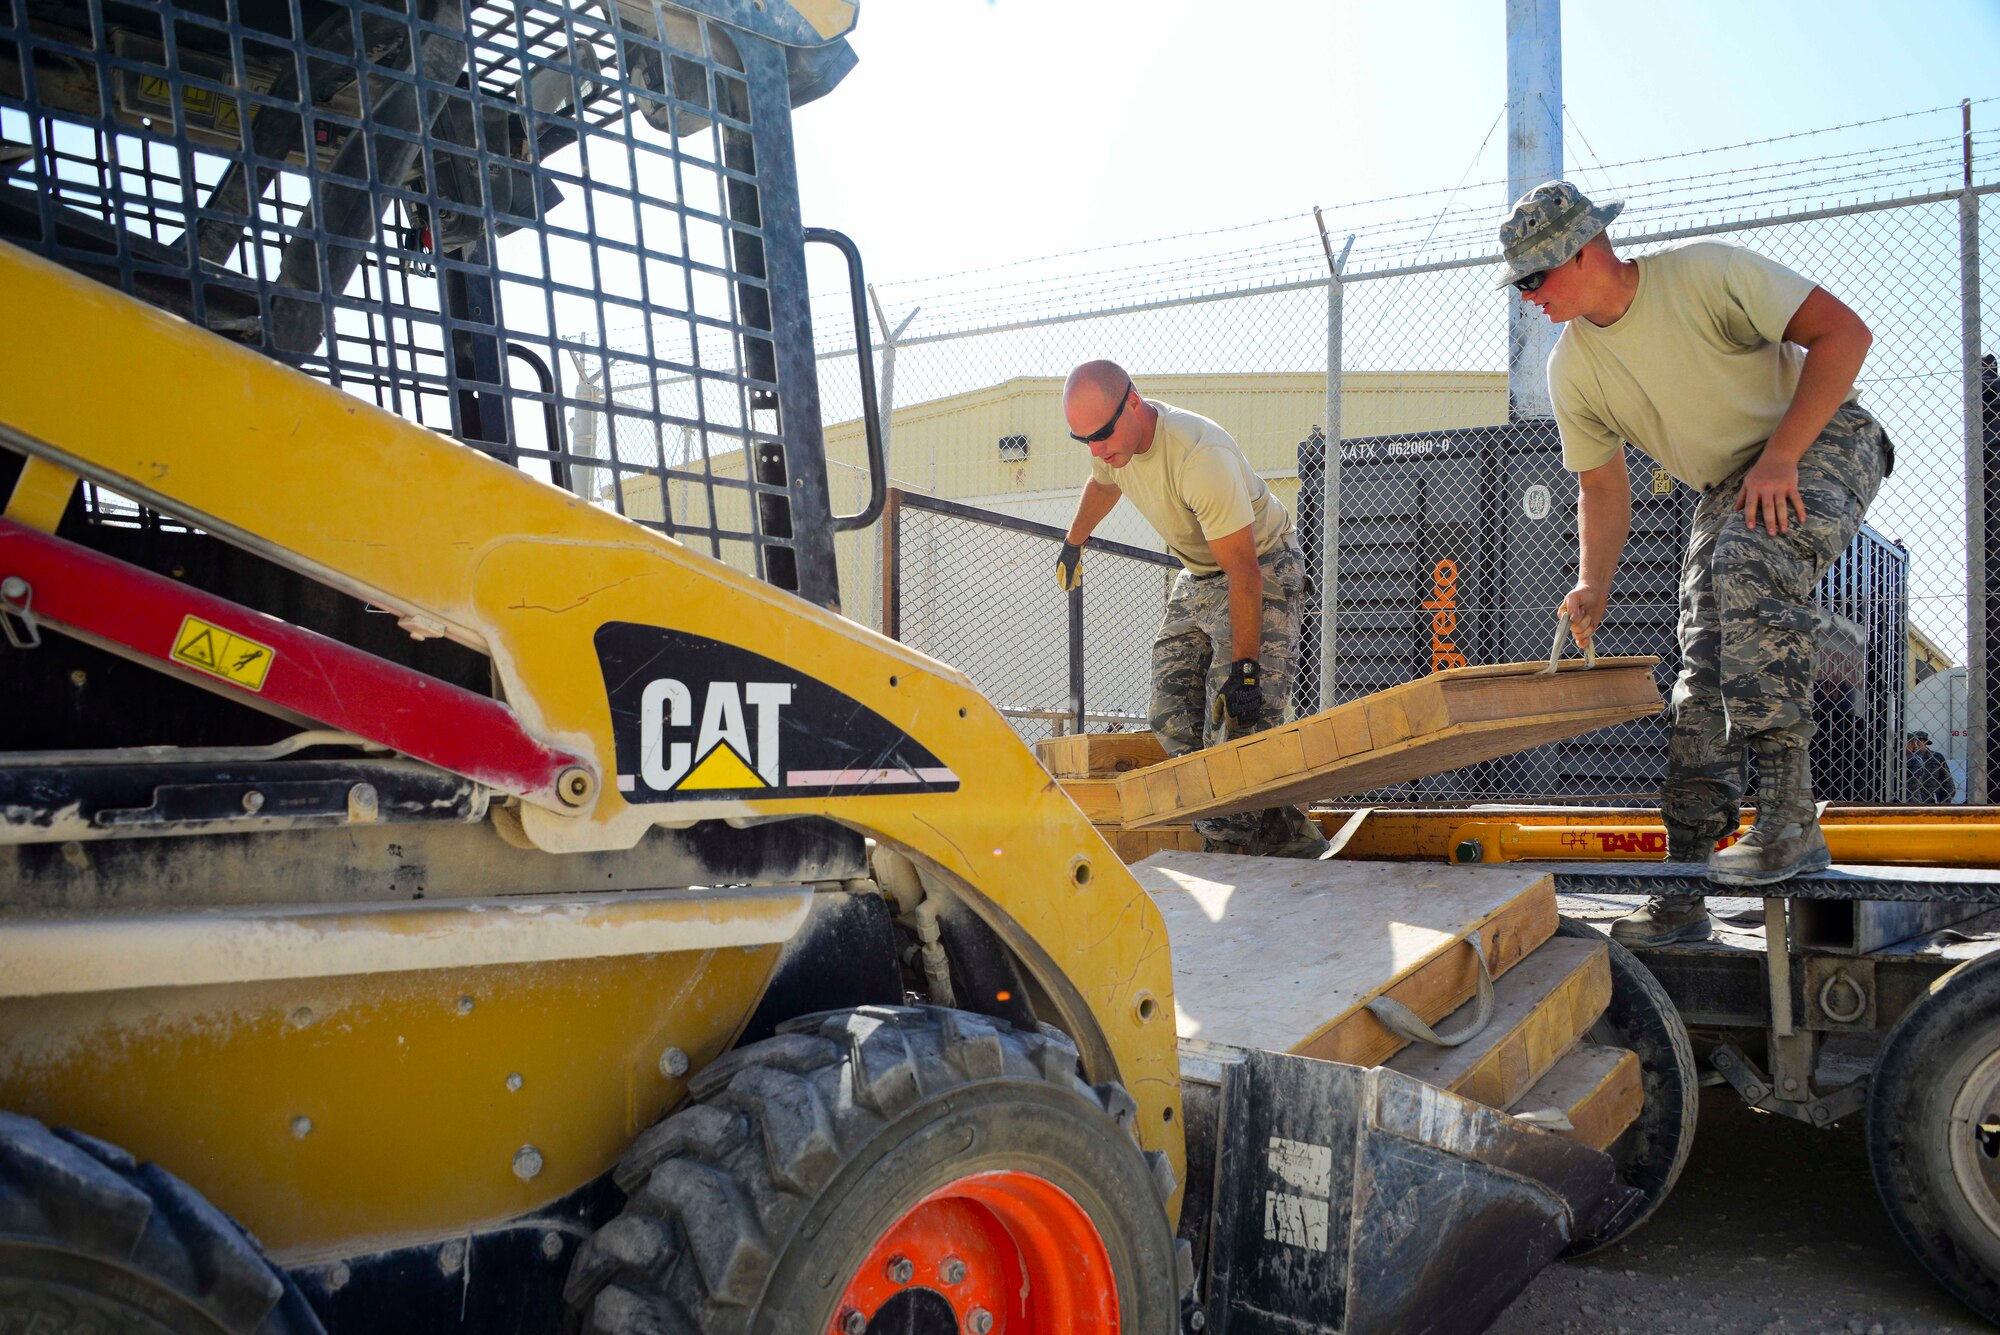 Staff Sgt. Robert Clark, 379th Expeditionary Civil Engineer Squadron pavements and equipment craftsman, and Senior Airman Ryan Batt, 379th ECES pavements and equipment specialist, load outrigger pads into a forklift truck Oct. 8, 2016, at Al Udeid Air Base, Qatar. Airmen from the 379th ECES and 379th Expeditionary Communications Squadron worked together to take down several inactive microwave dish transmissions from an area radio tower. (U.S. Air Force photo/Senior Airman Janelle Patiño/Released)